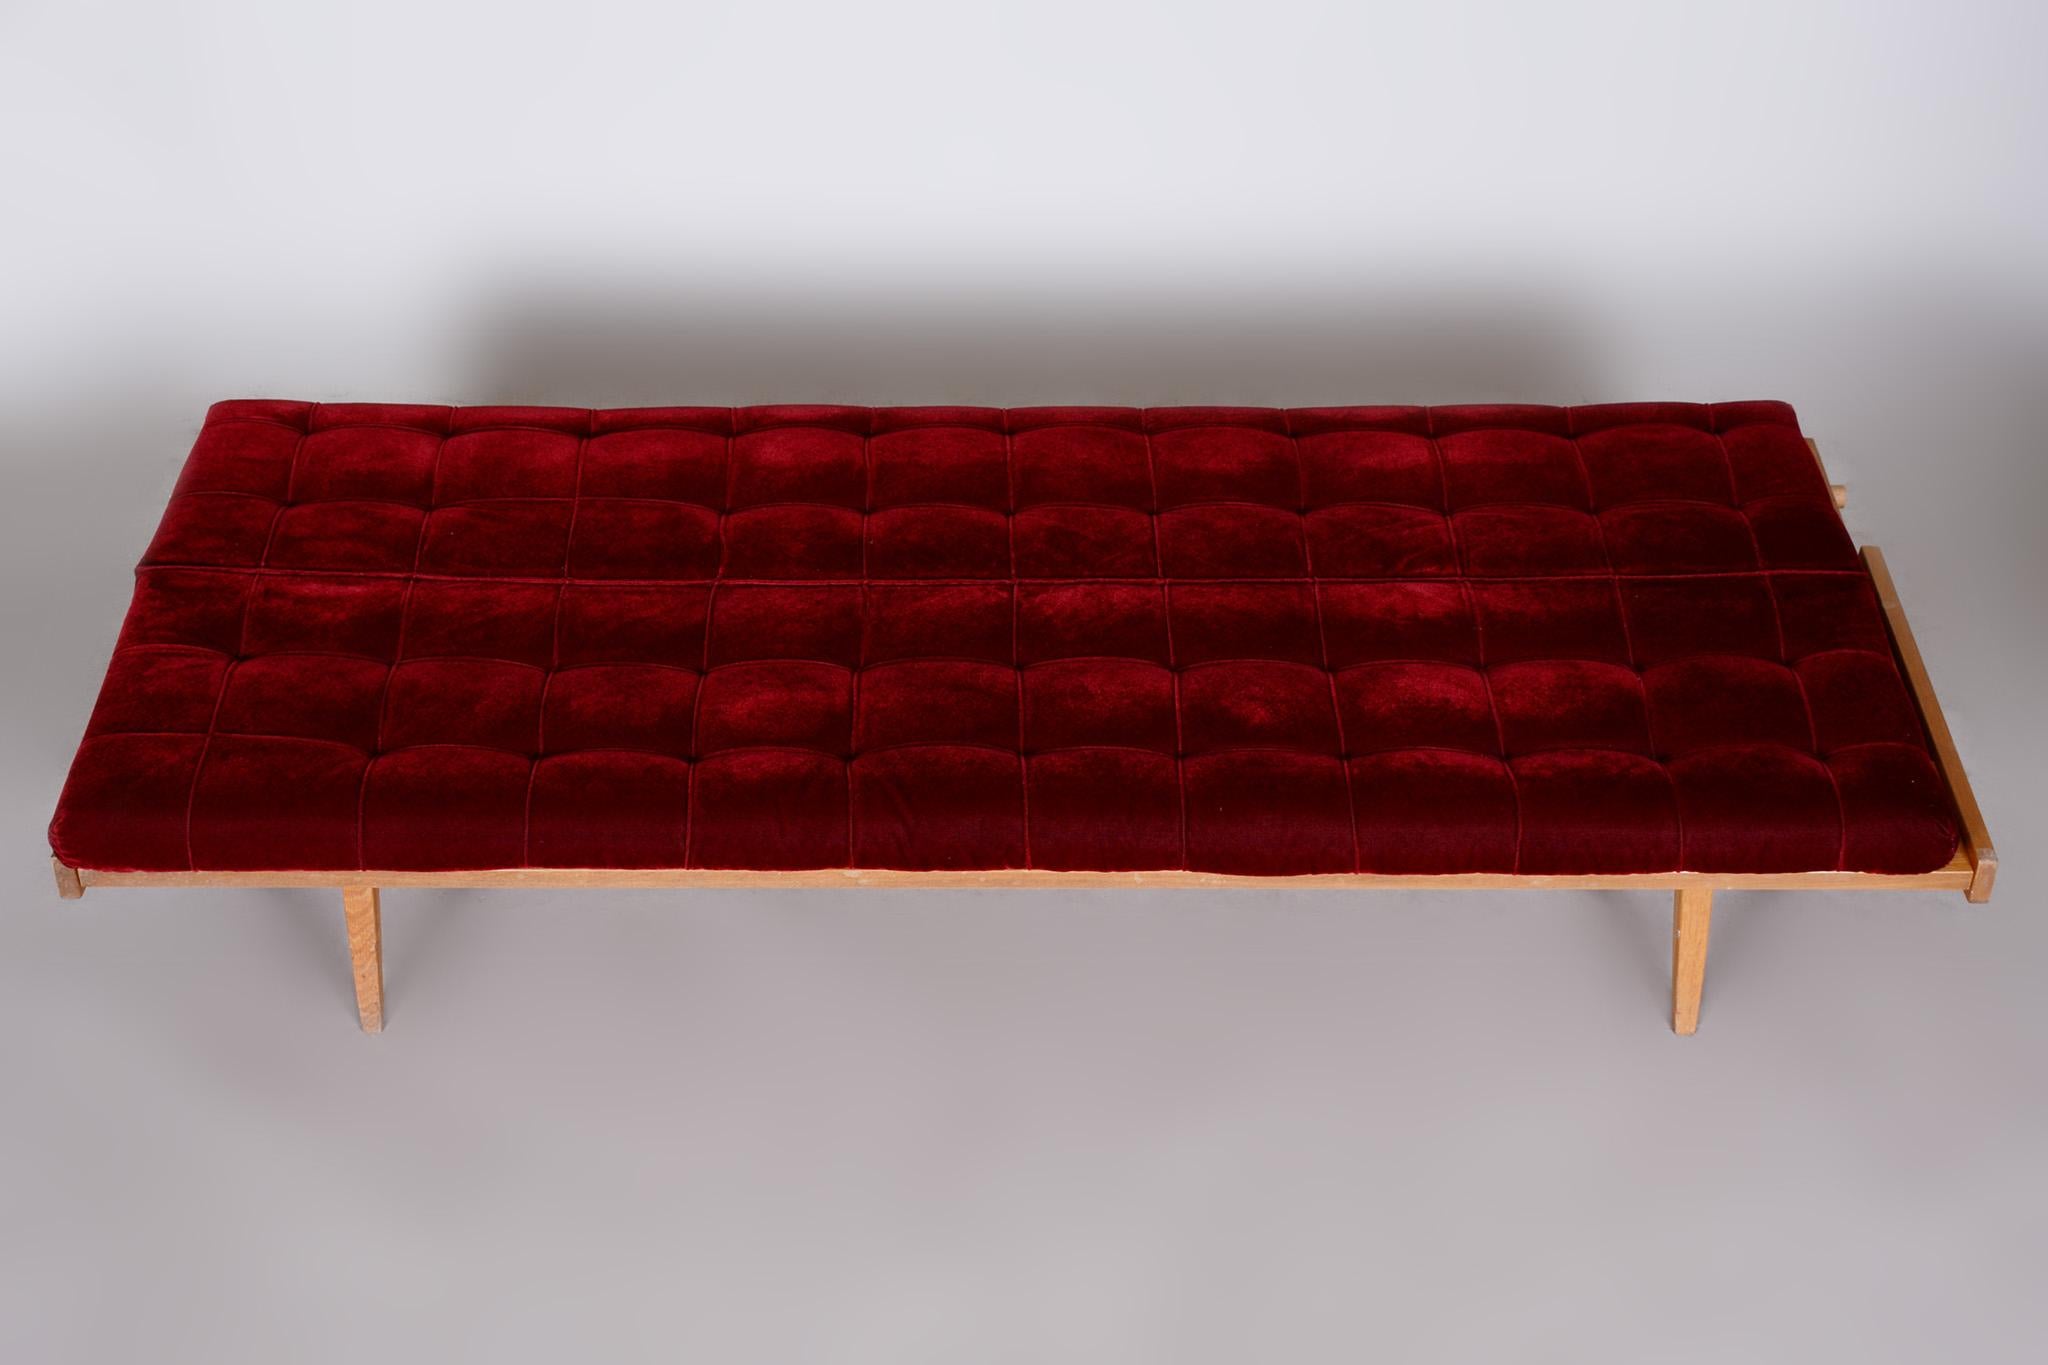 Red Mid-Century Modern Oak Sofa, 1950s, Original Well Preserved Upholstery For Sale 2